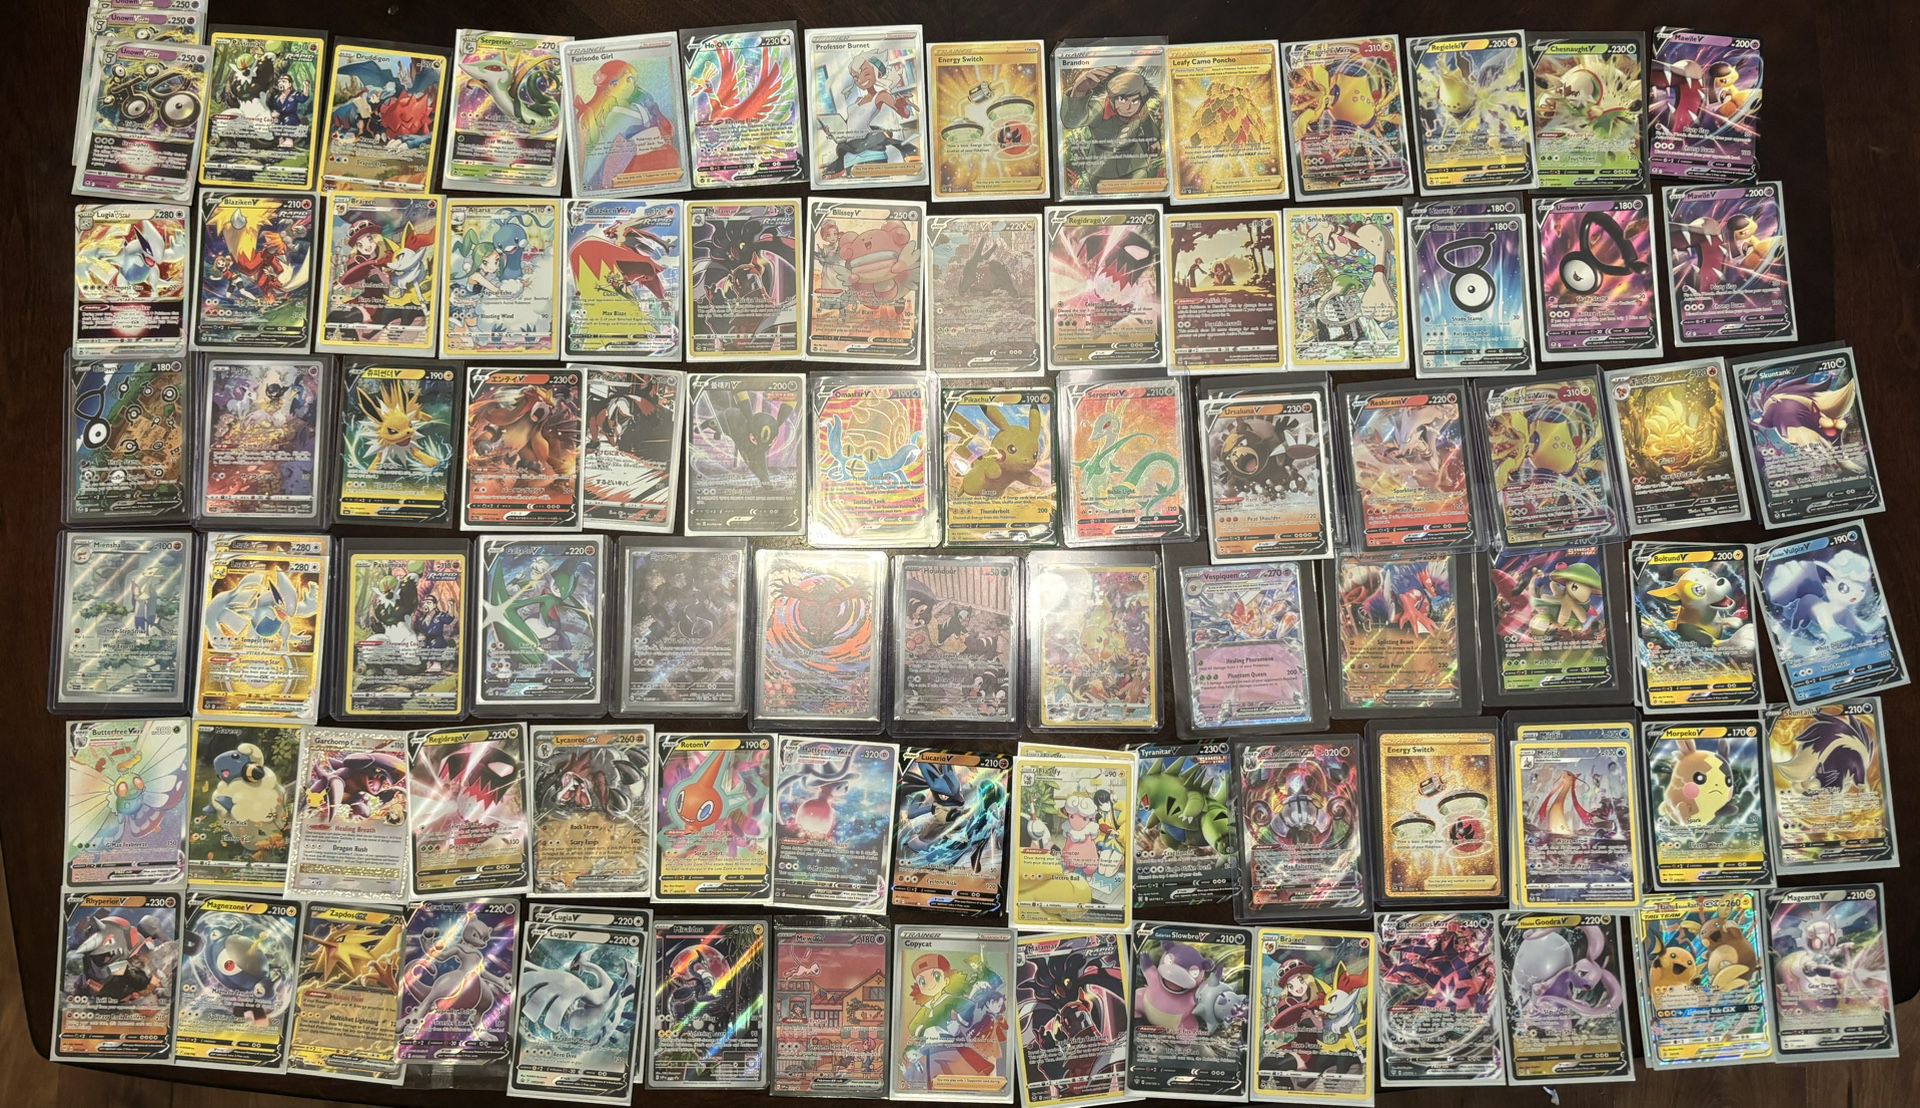 Lot of 100 Pokemon cards, Mix of alt arts, golds, rainbow and full arts asking $300($3/ card)